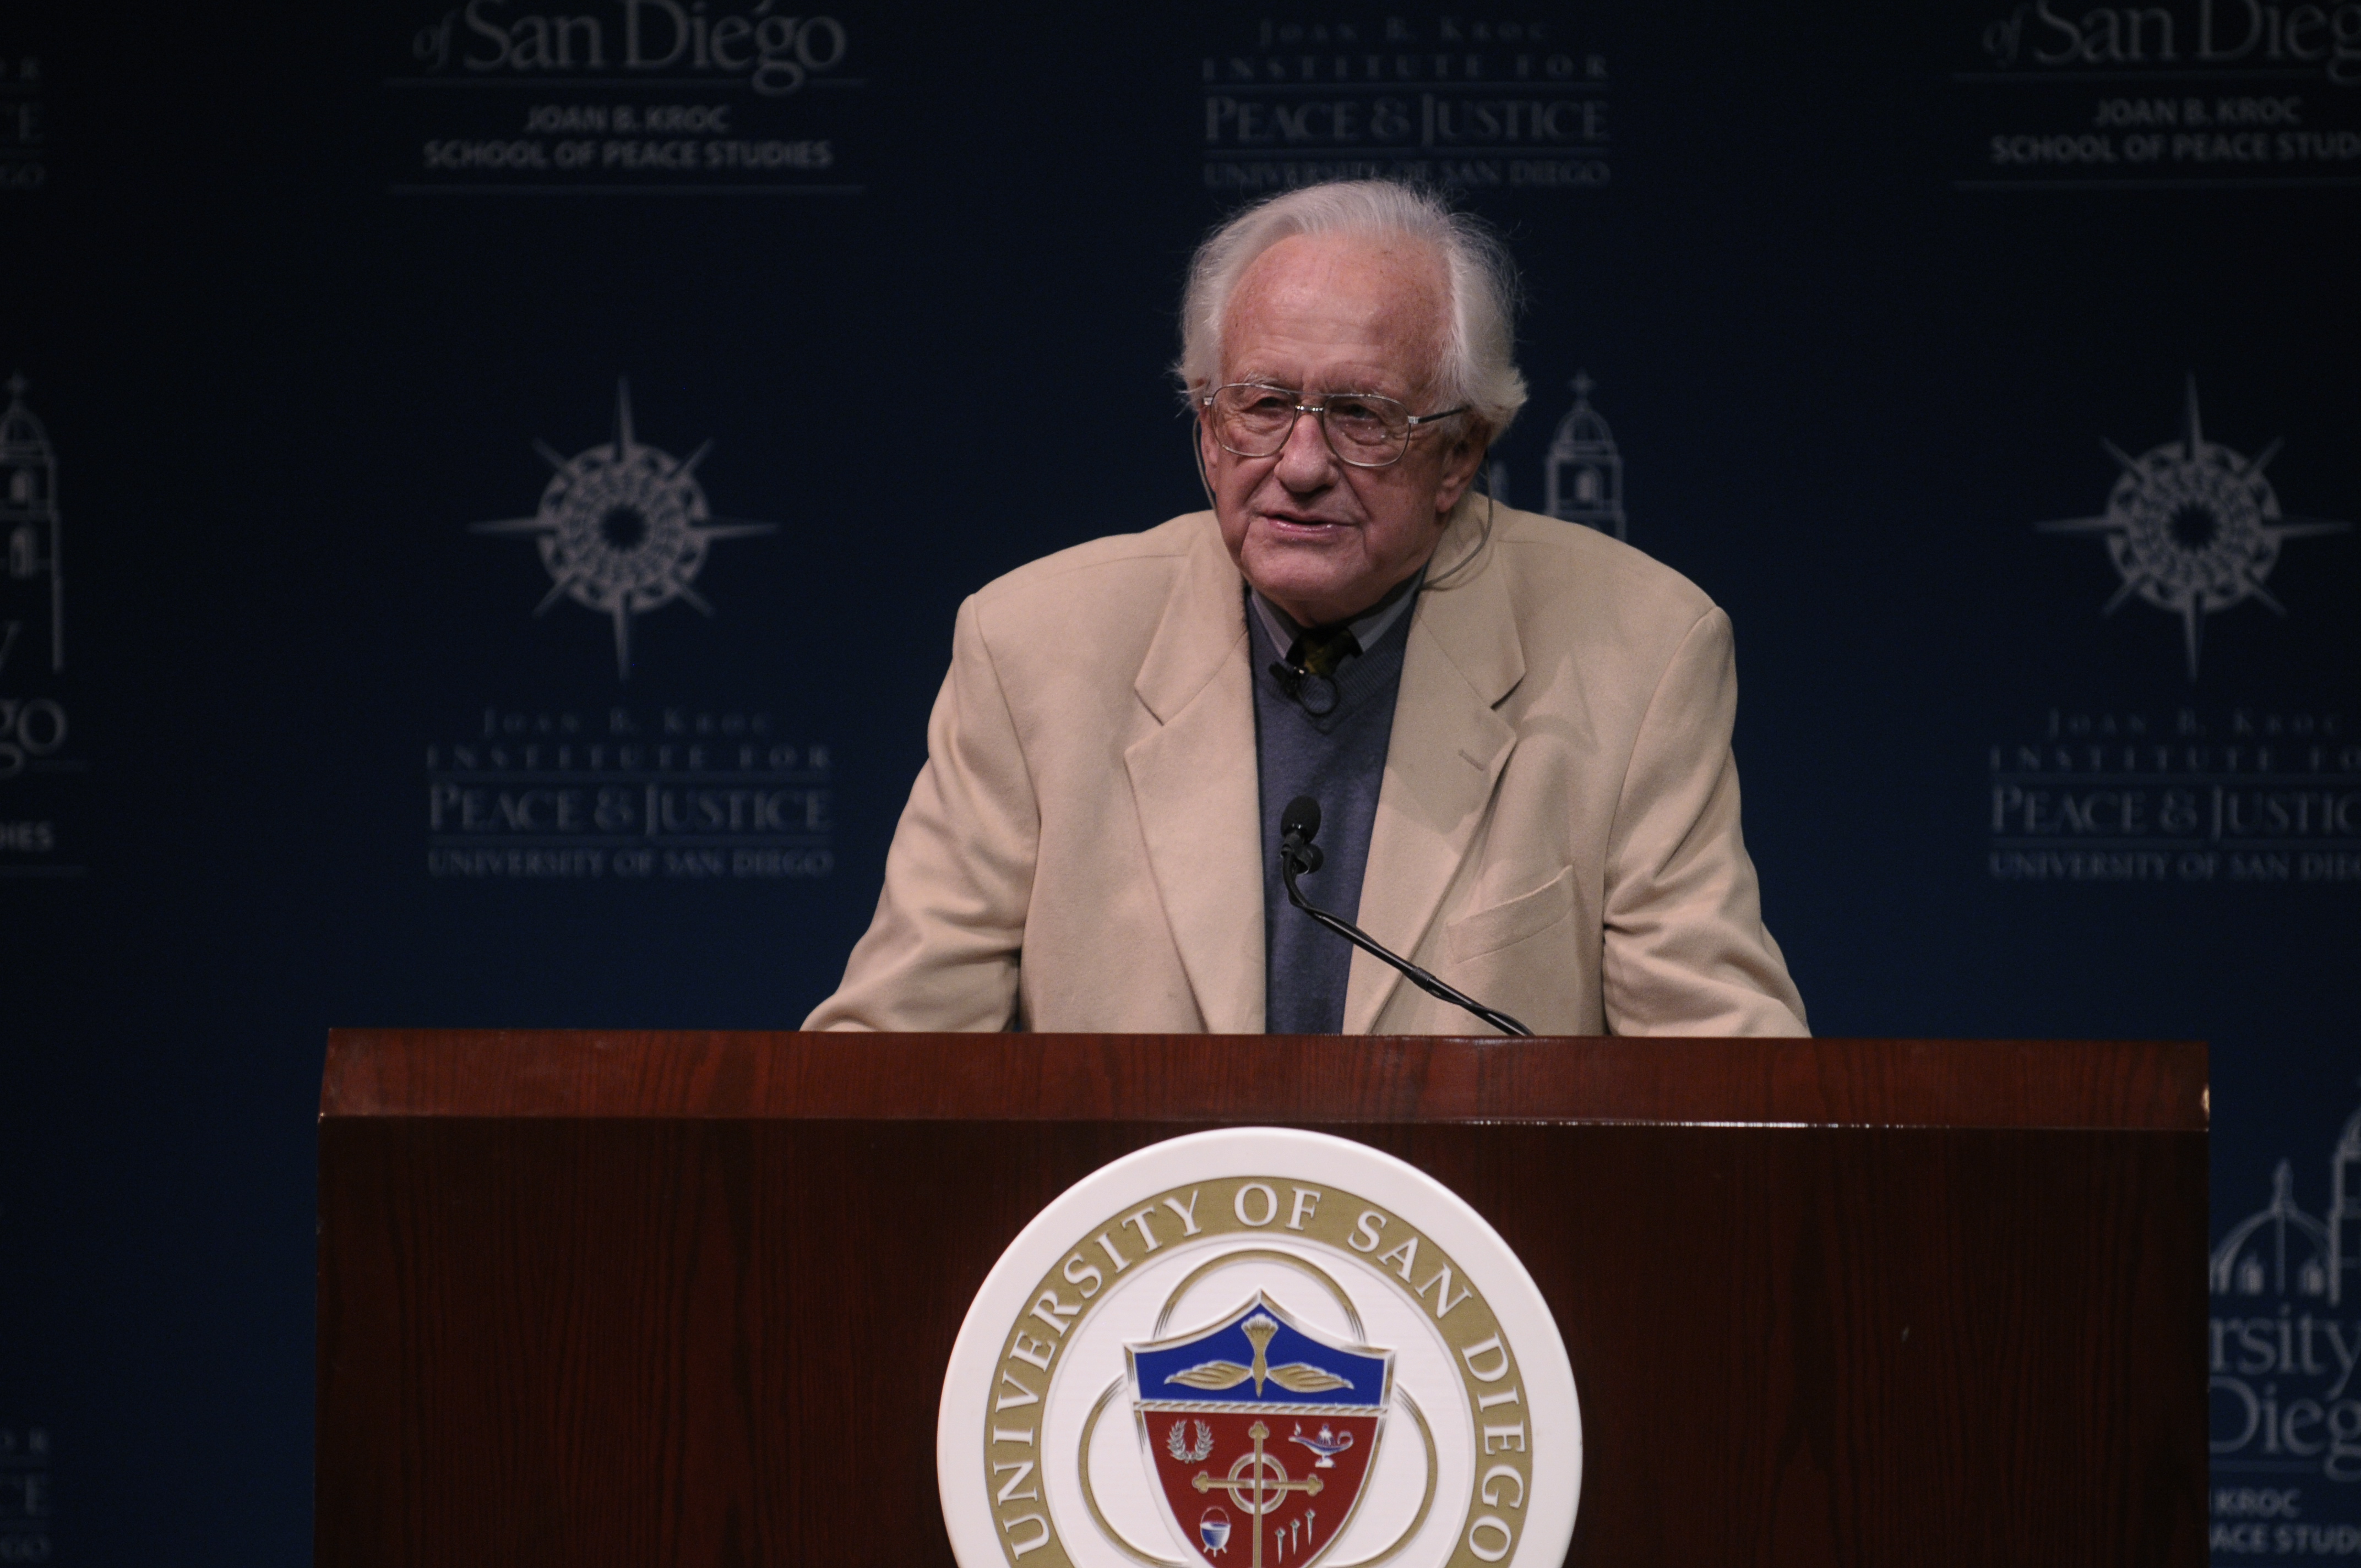 On the Passing of Johan Galtung and our Passage into the Future